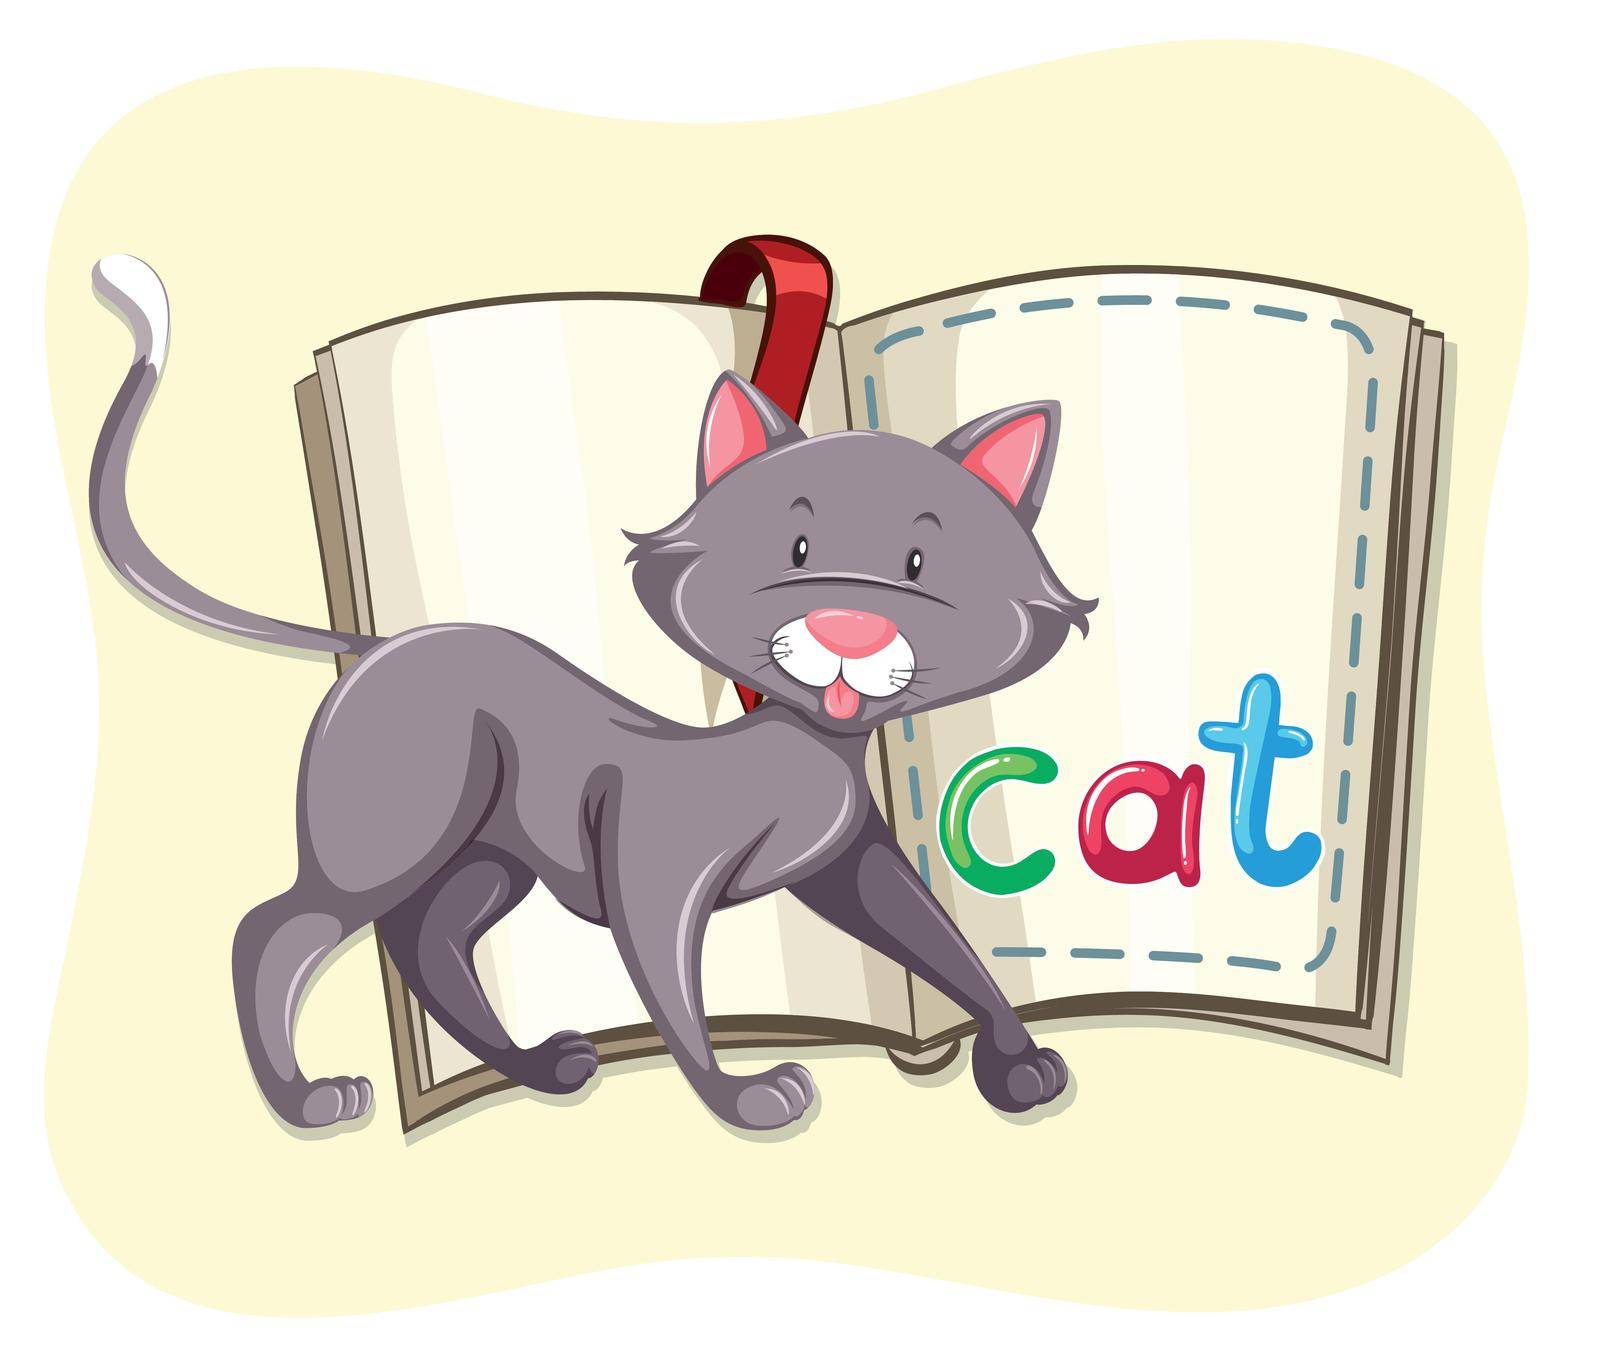 Gray cat and a book illustration